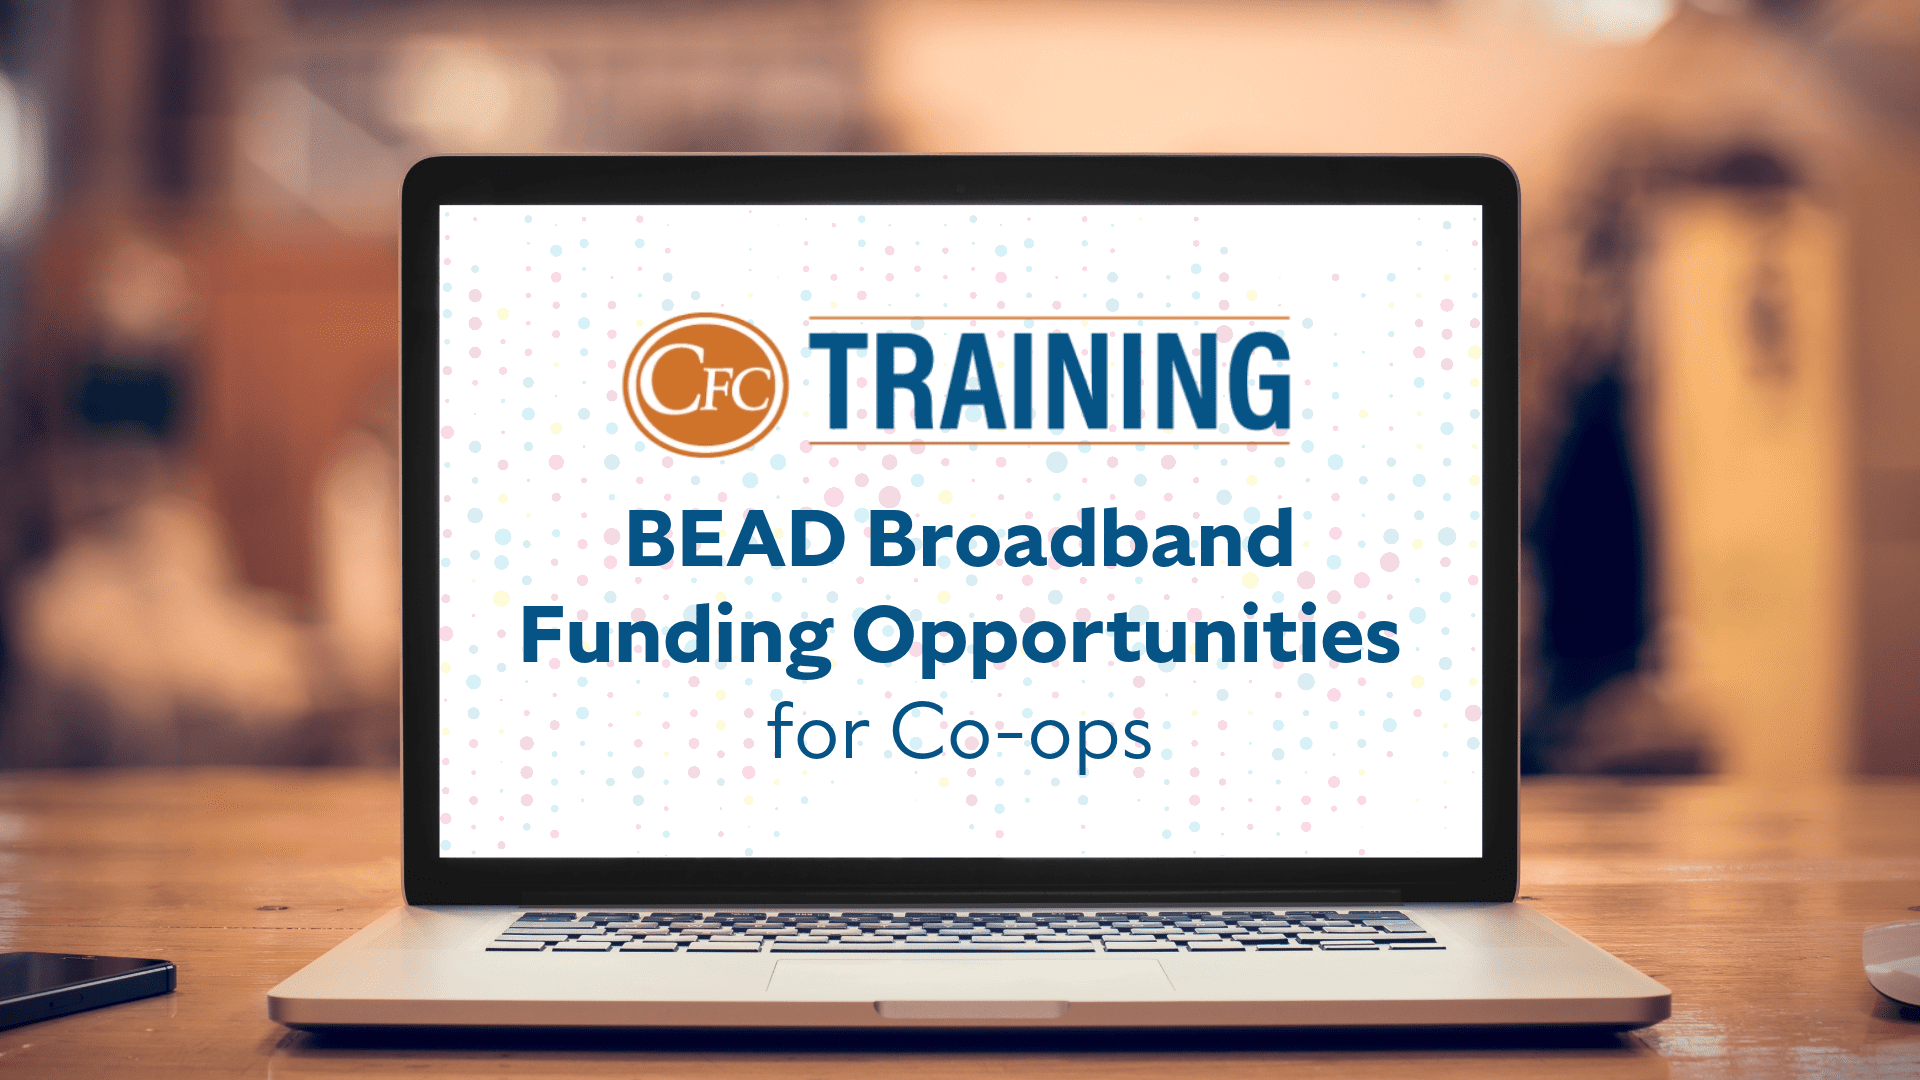 BEAD Broadband Funding Opportunities for Co-ops